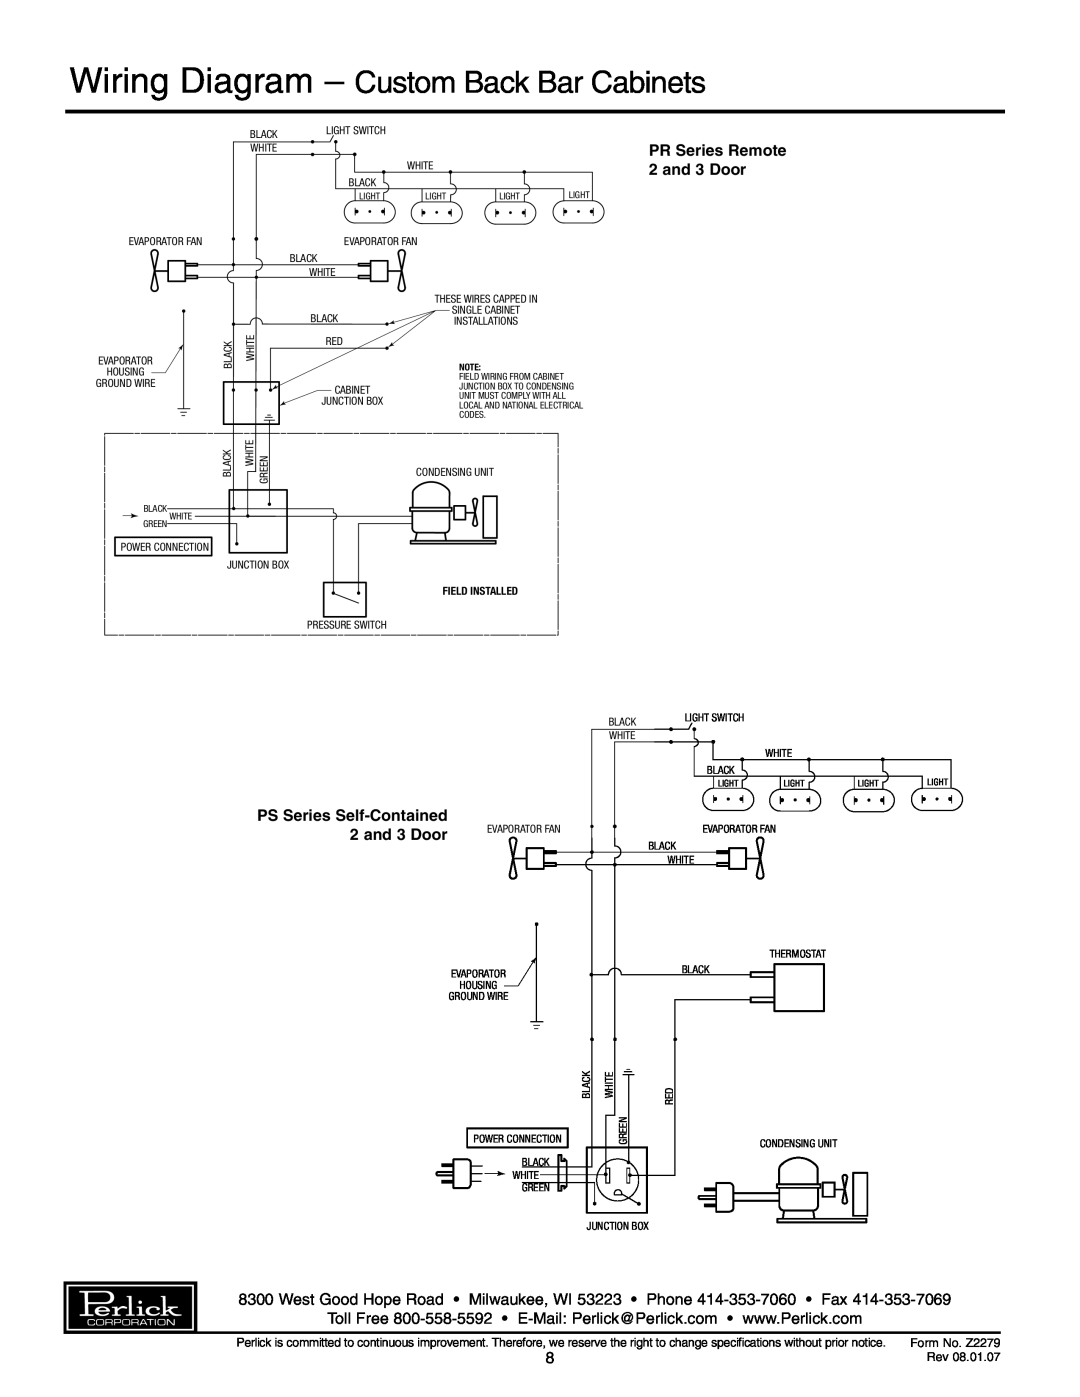 Perlick PS84, PR48, PS60 Wiring Diagram - Custom Back Bar Cabinets, PR Series Remote 2 and 3 Door, PS Series Self-Contained 